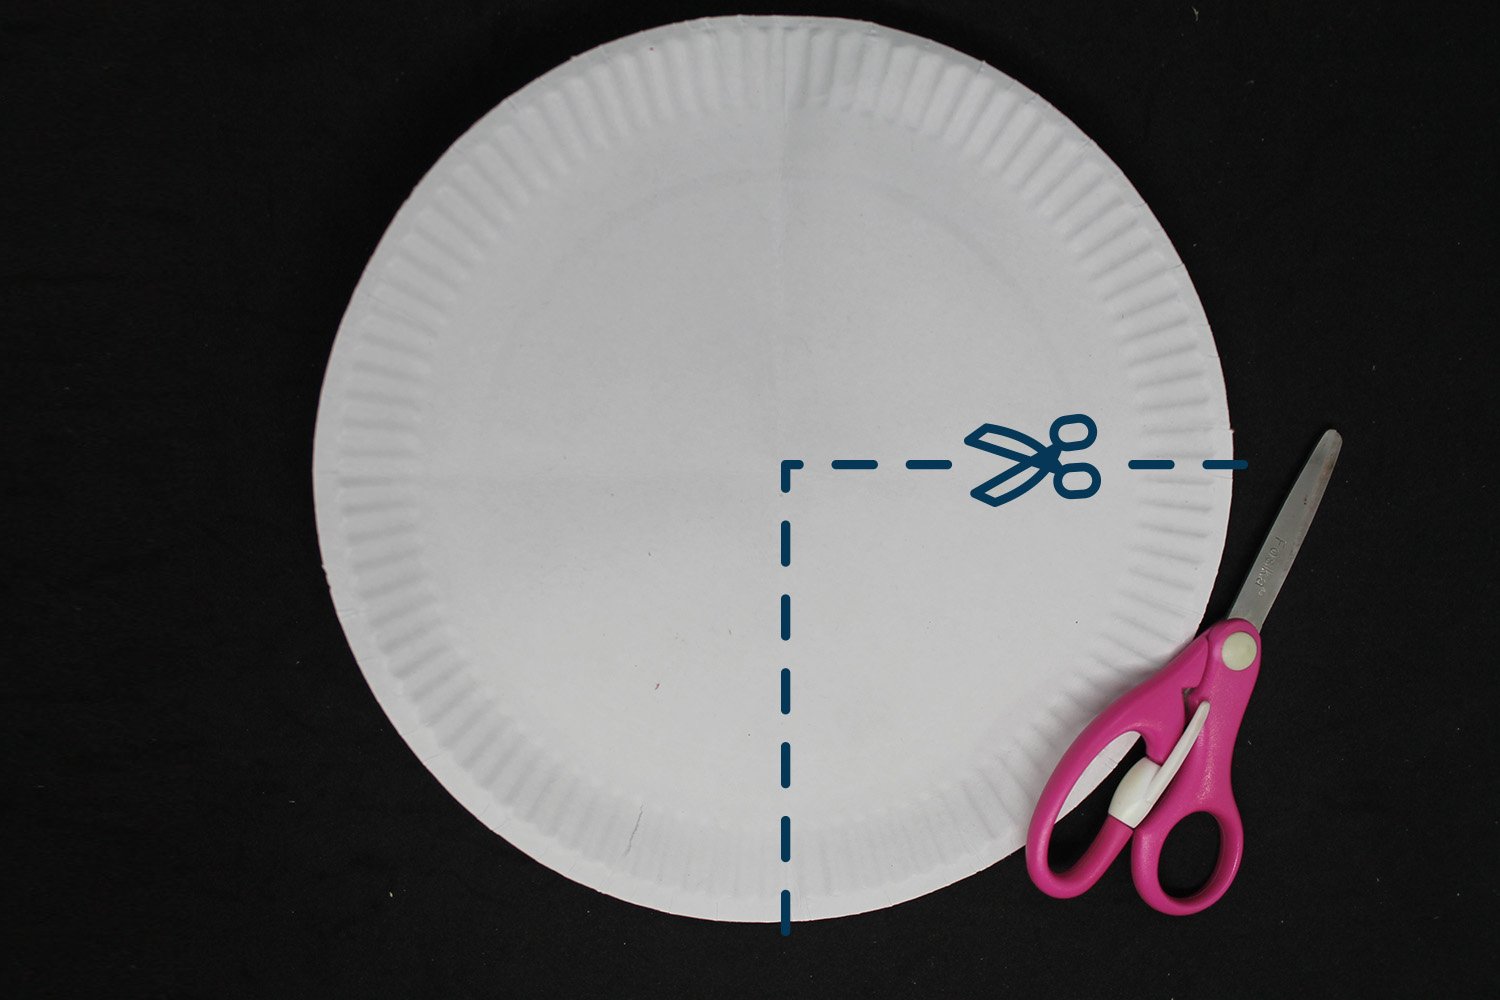 How to Make a Paper Plate Monster - Step 2